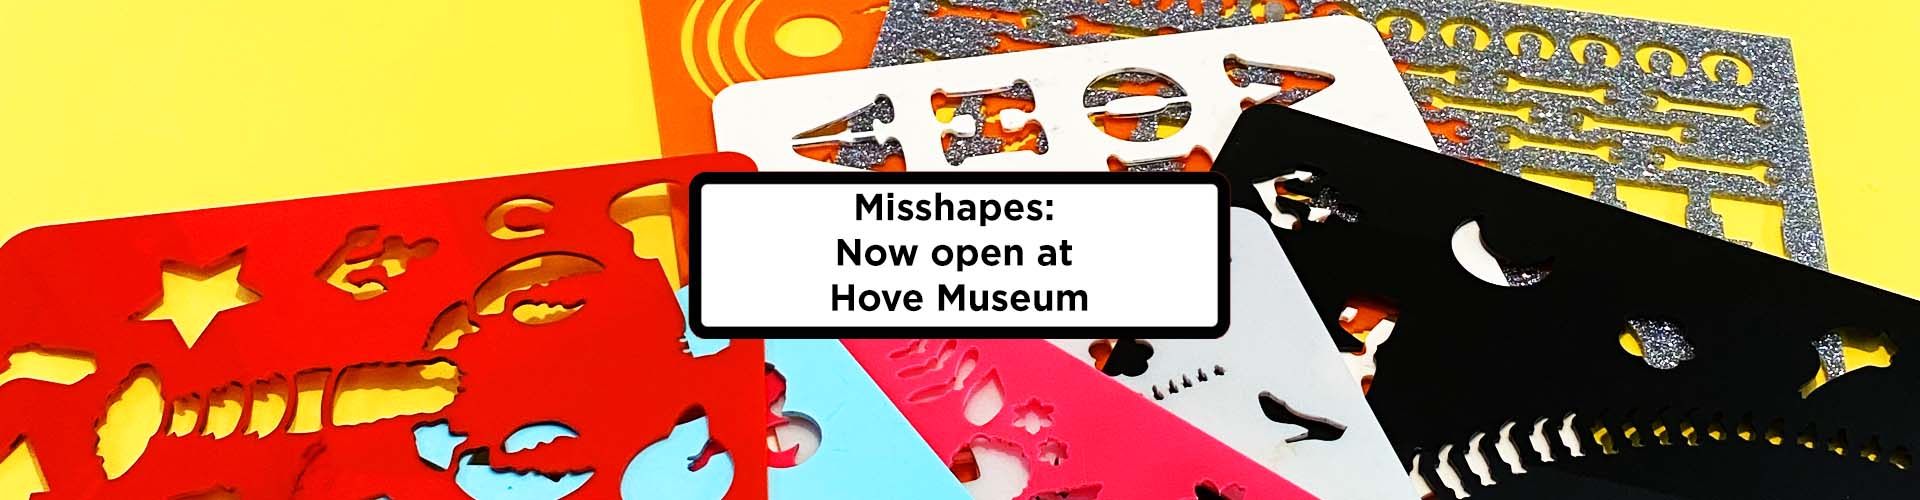 Misshapes: Now open at Hove Museum